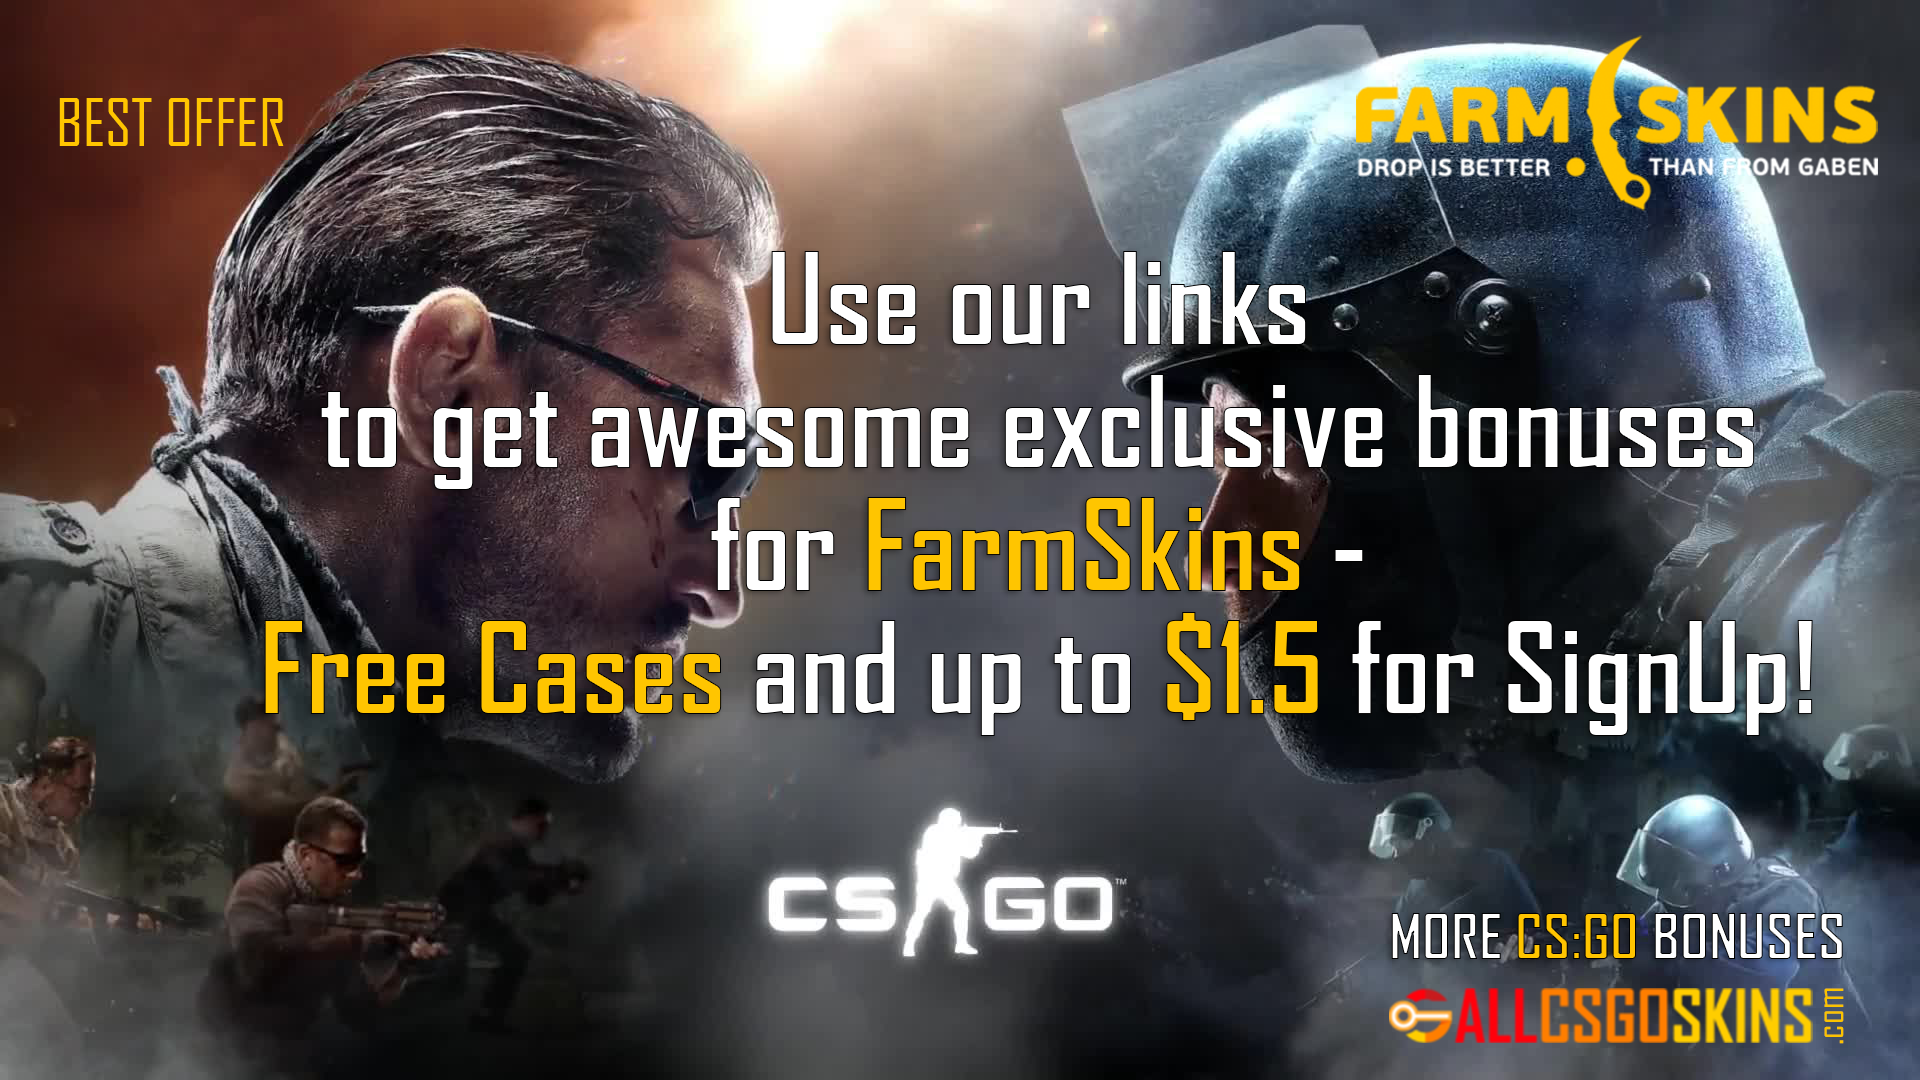 FarmSkins Promo Codes 2024: Get FREE Cases and Up to $1.5 SignUp Exclusive Bonuses